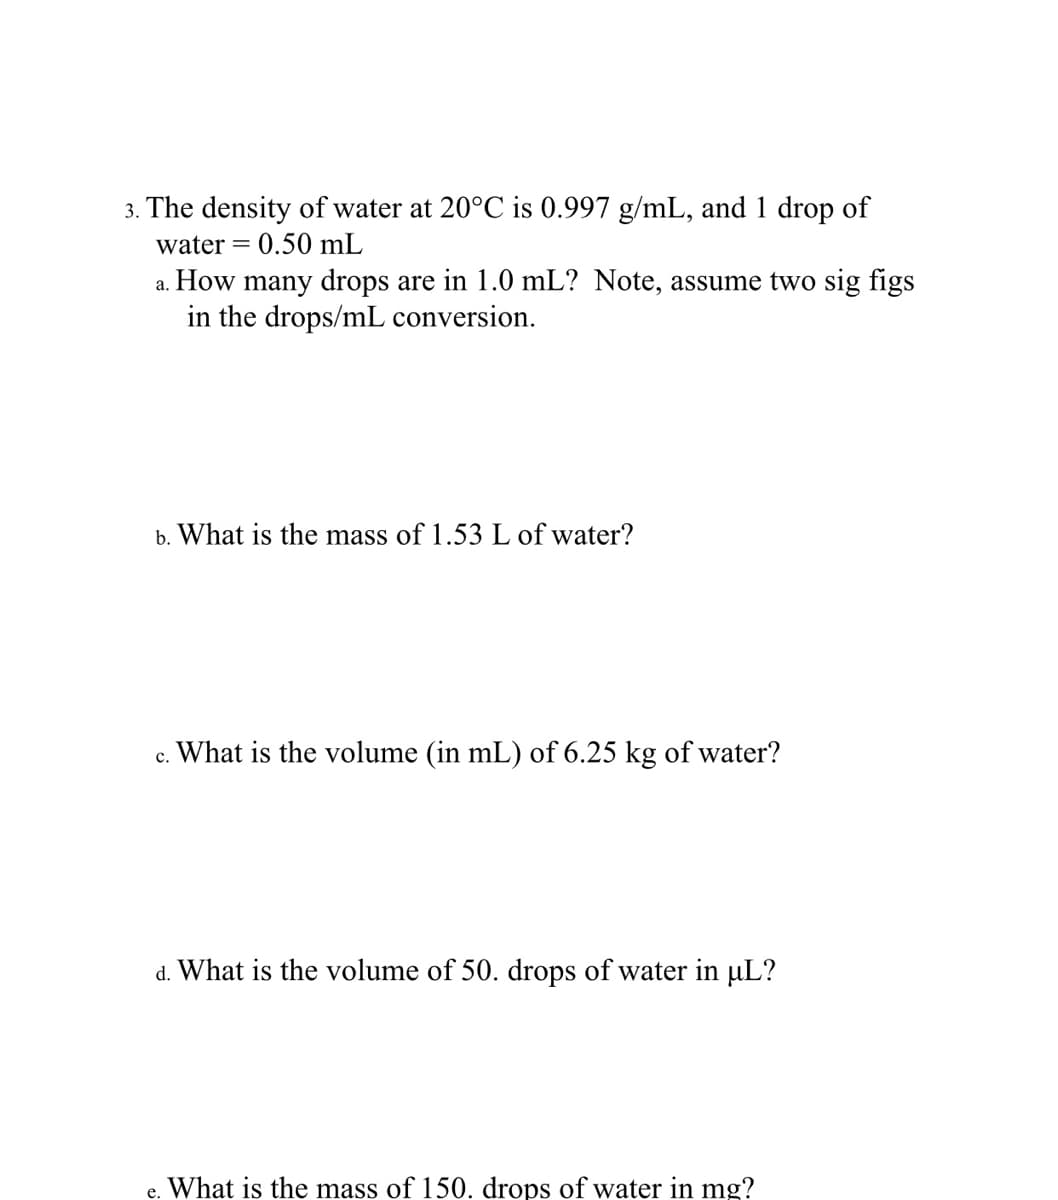 3. The density of water at 20°C is 0.997 g/mL, and 1 drop of
water = 0.50 mL
a. How many drops are in 1.0 mL? Note, assume two sig figs
in the drops/mL conversion.
b. What is the mass of 1.53 L of water?
c. What is the volume (in mL) of 6.25 kg of water?
d. What is the volume of 50. drops of water in µL?
e. What is the mass of 150. drops of water in mg?
